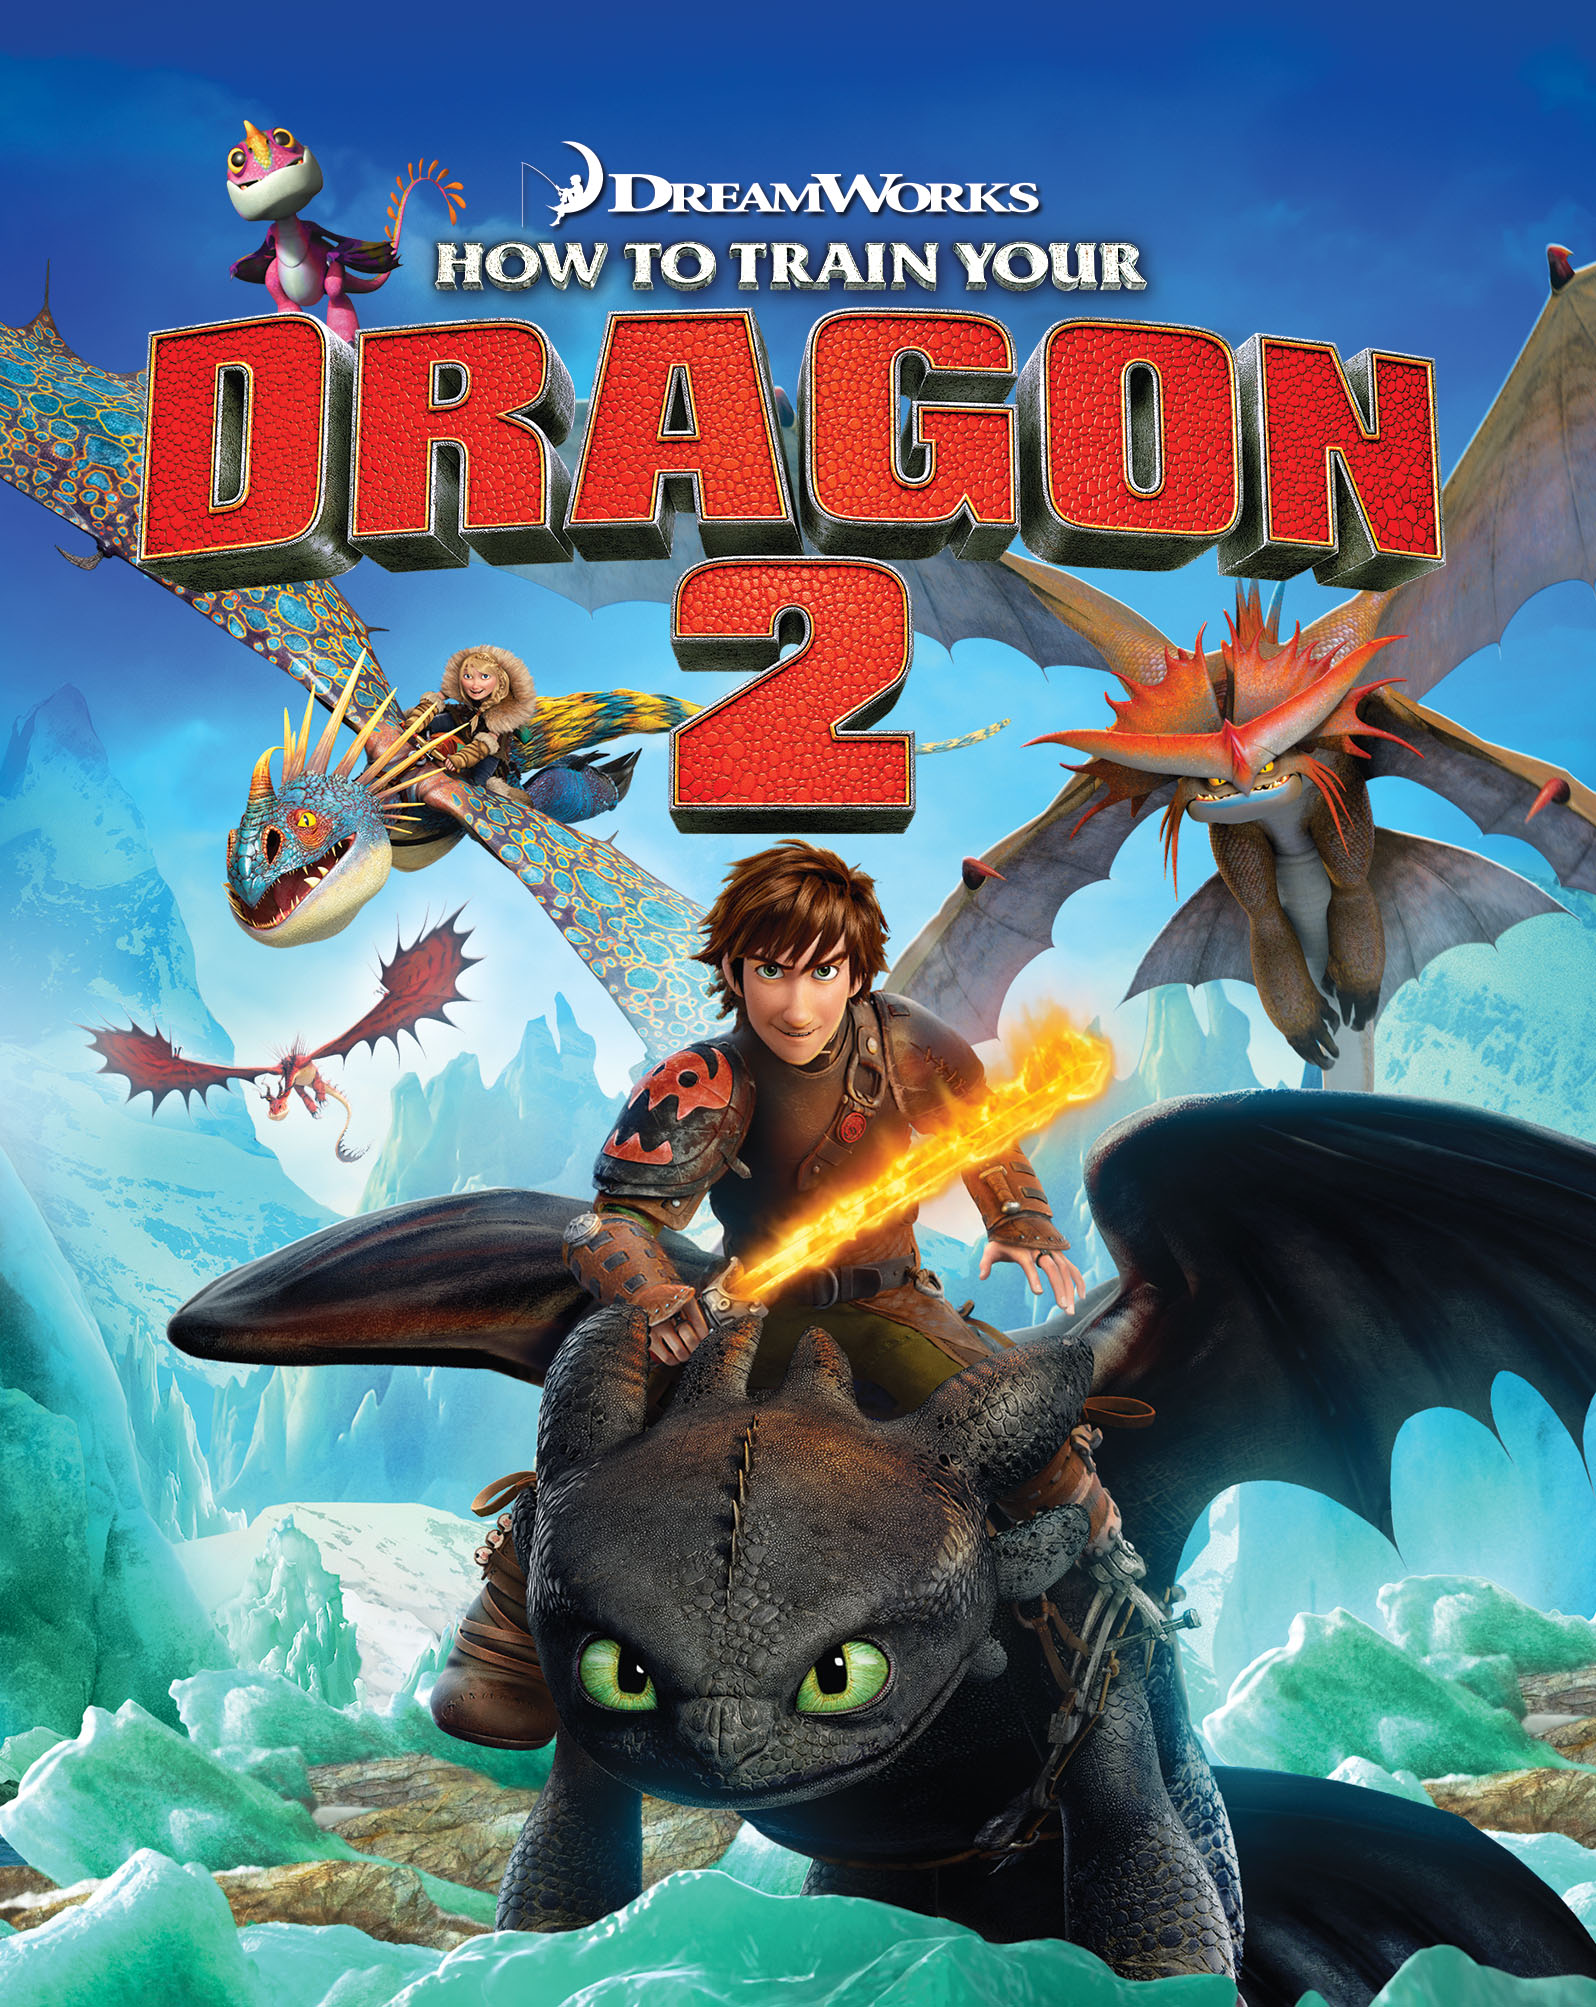 How To Train Your Dragon 2 HD wallpapers, Desktop wallpaper - most viewed